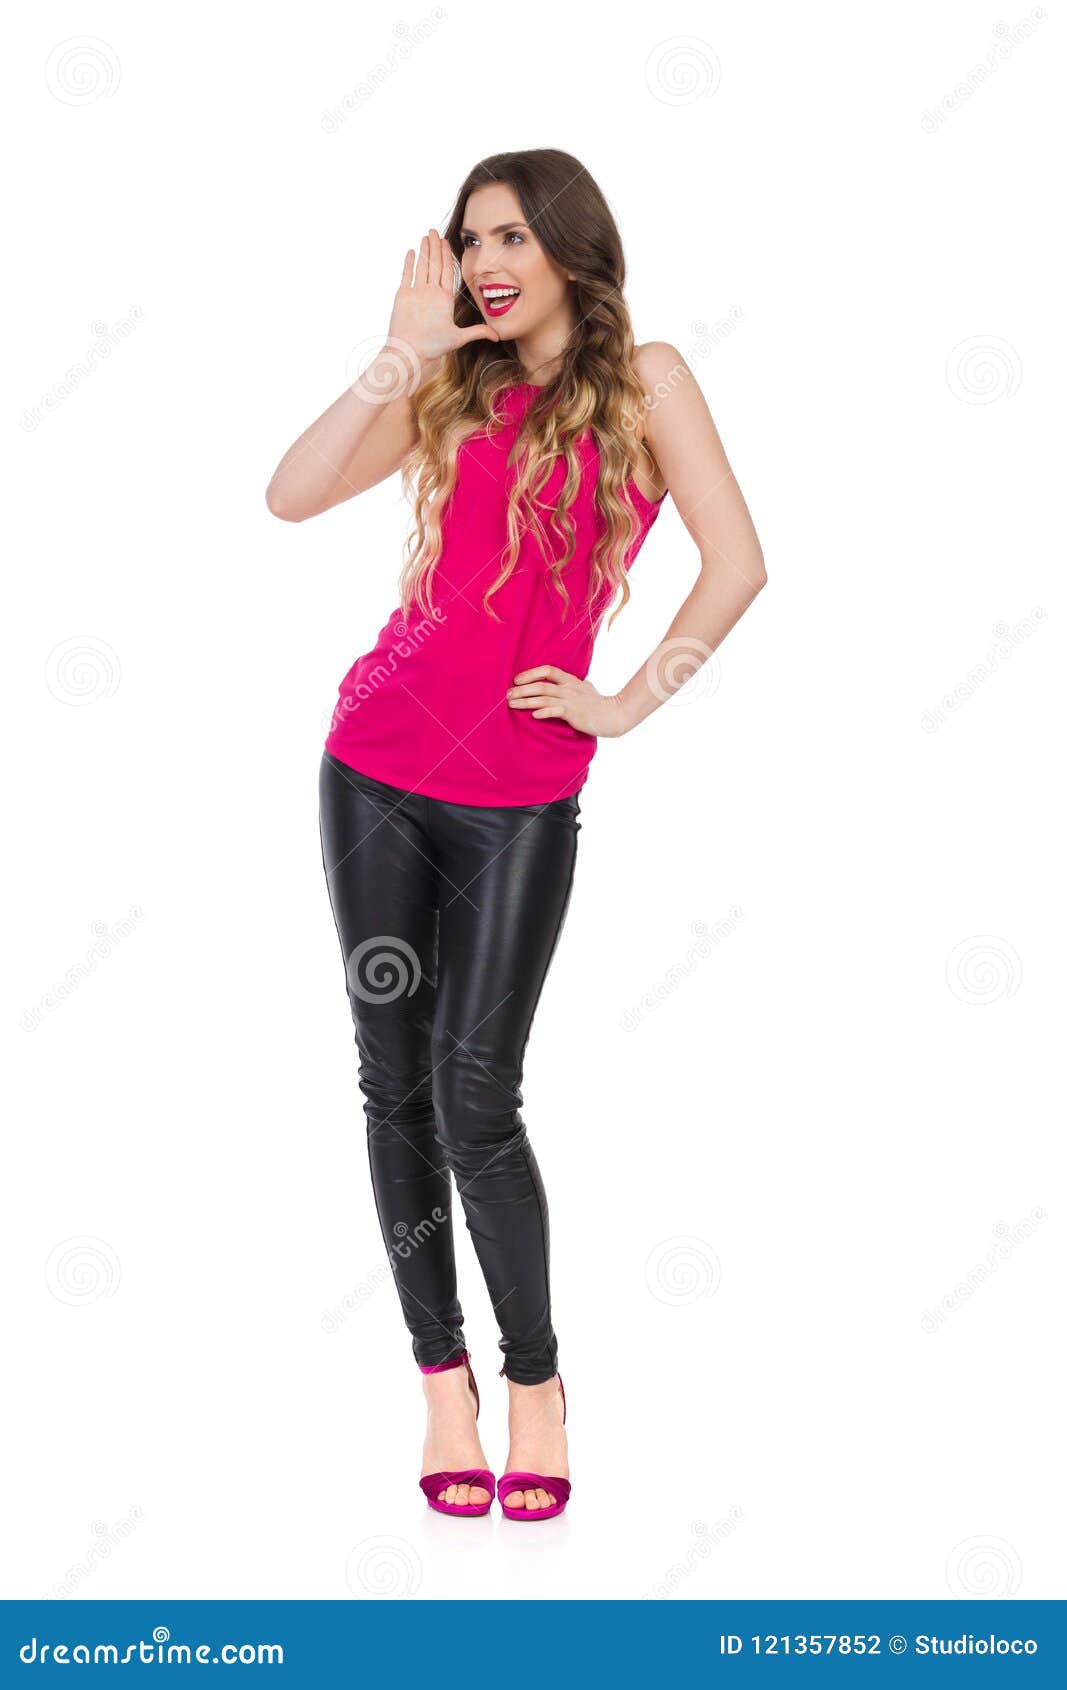 Black leather trousers girl